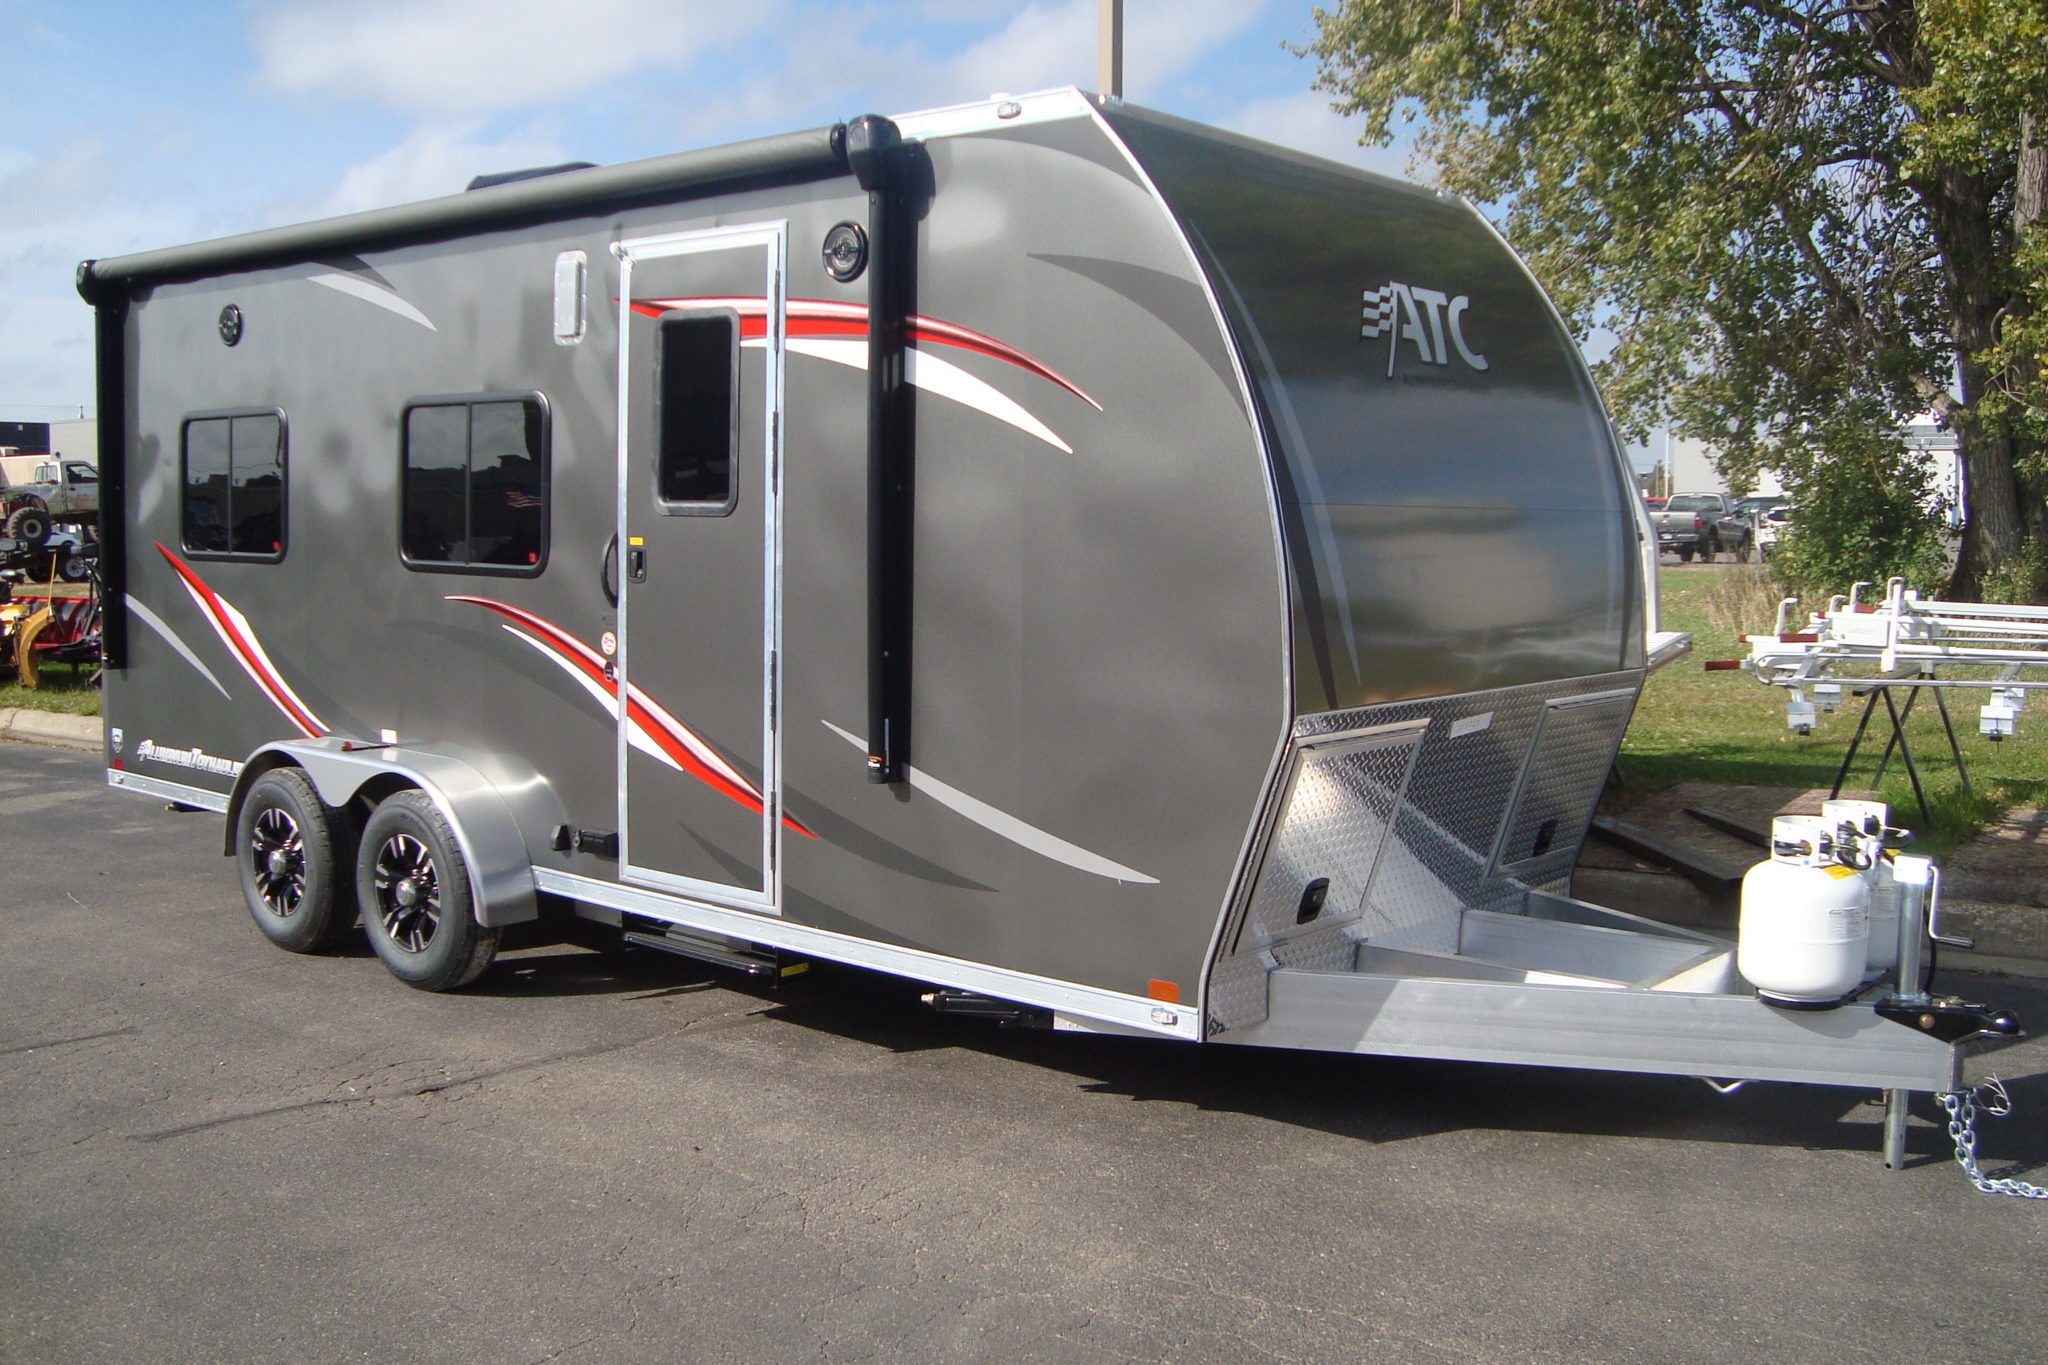 atc toy hauler for sale in western us